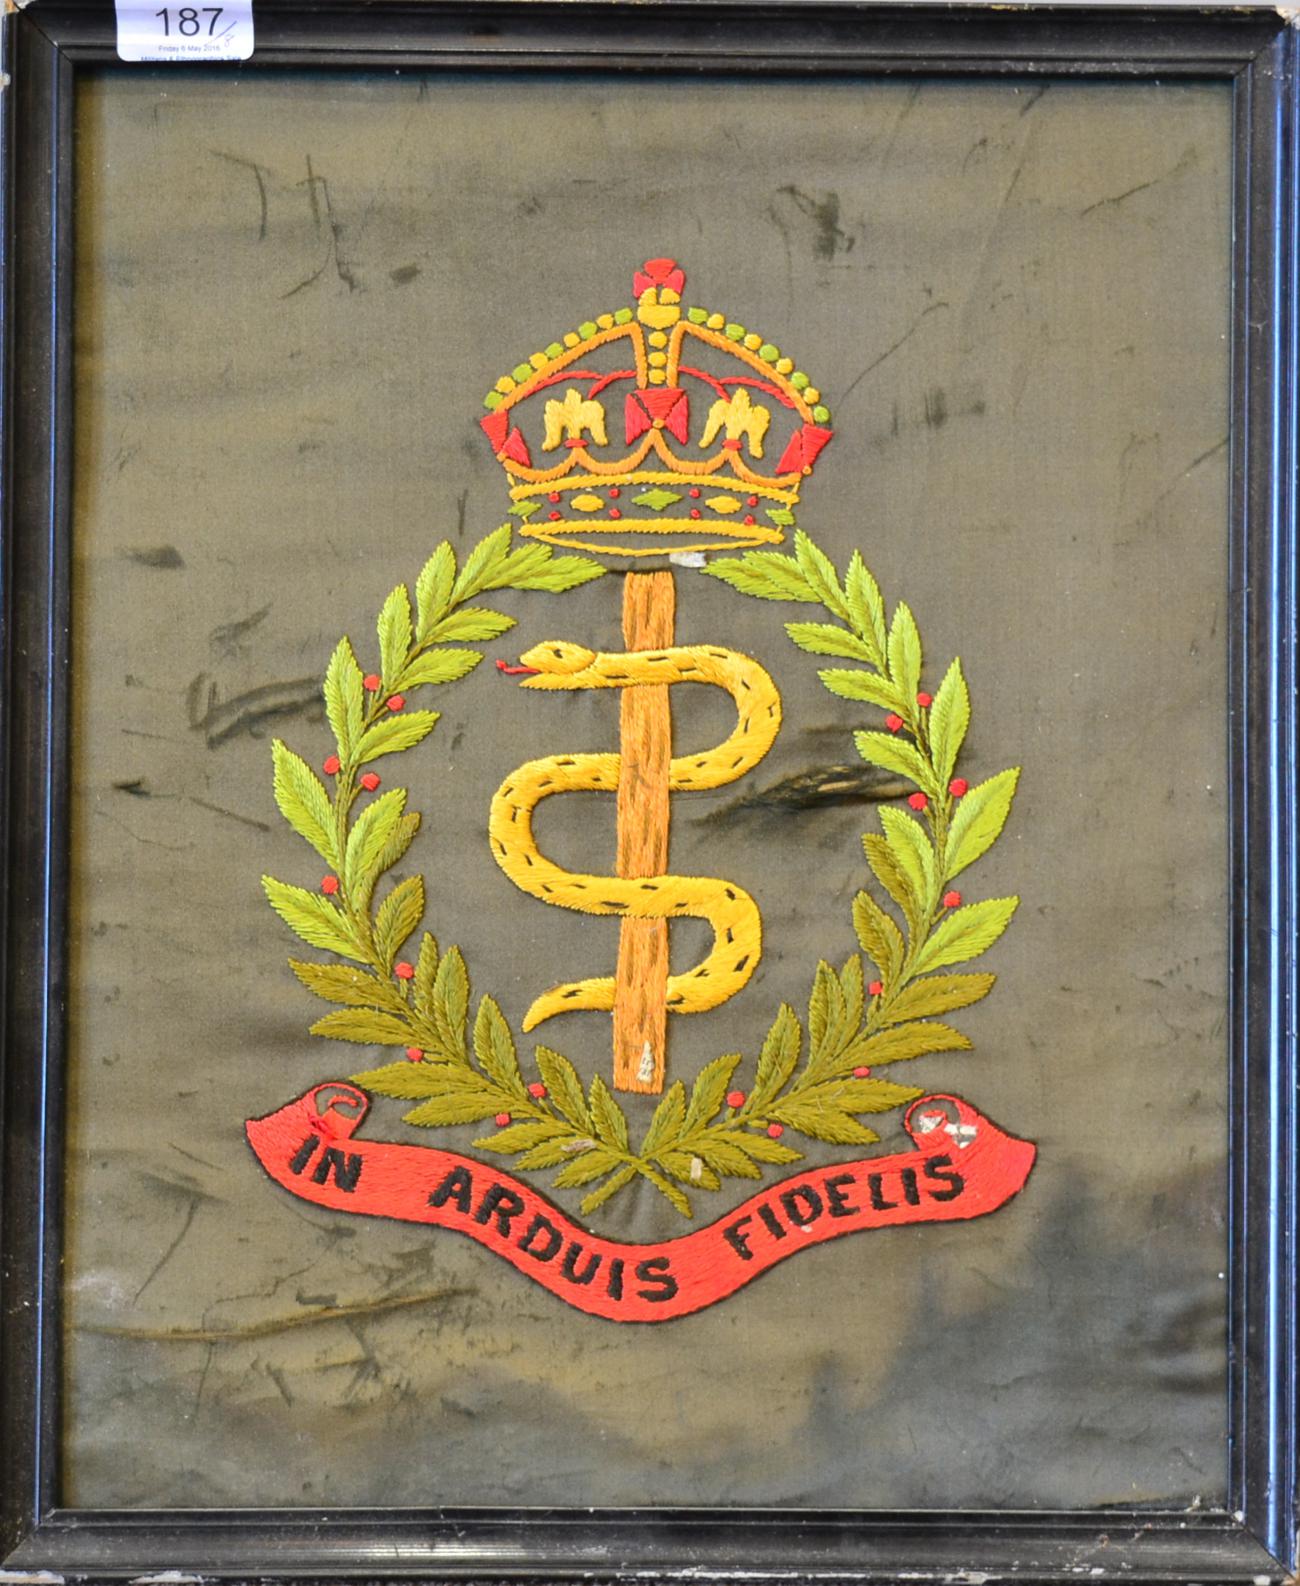 A First World War Embroidered Silk Picture, worked with the badge of the Royal Army Medical Corps;